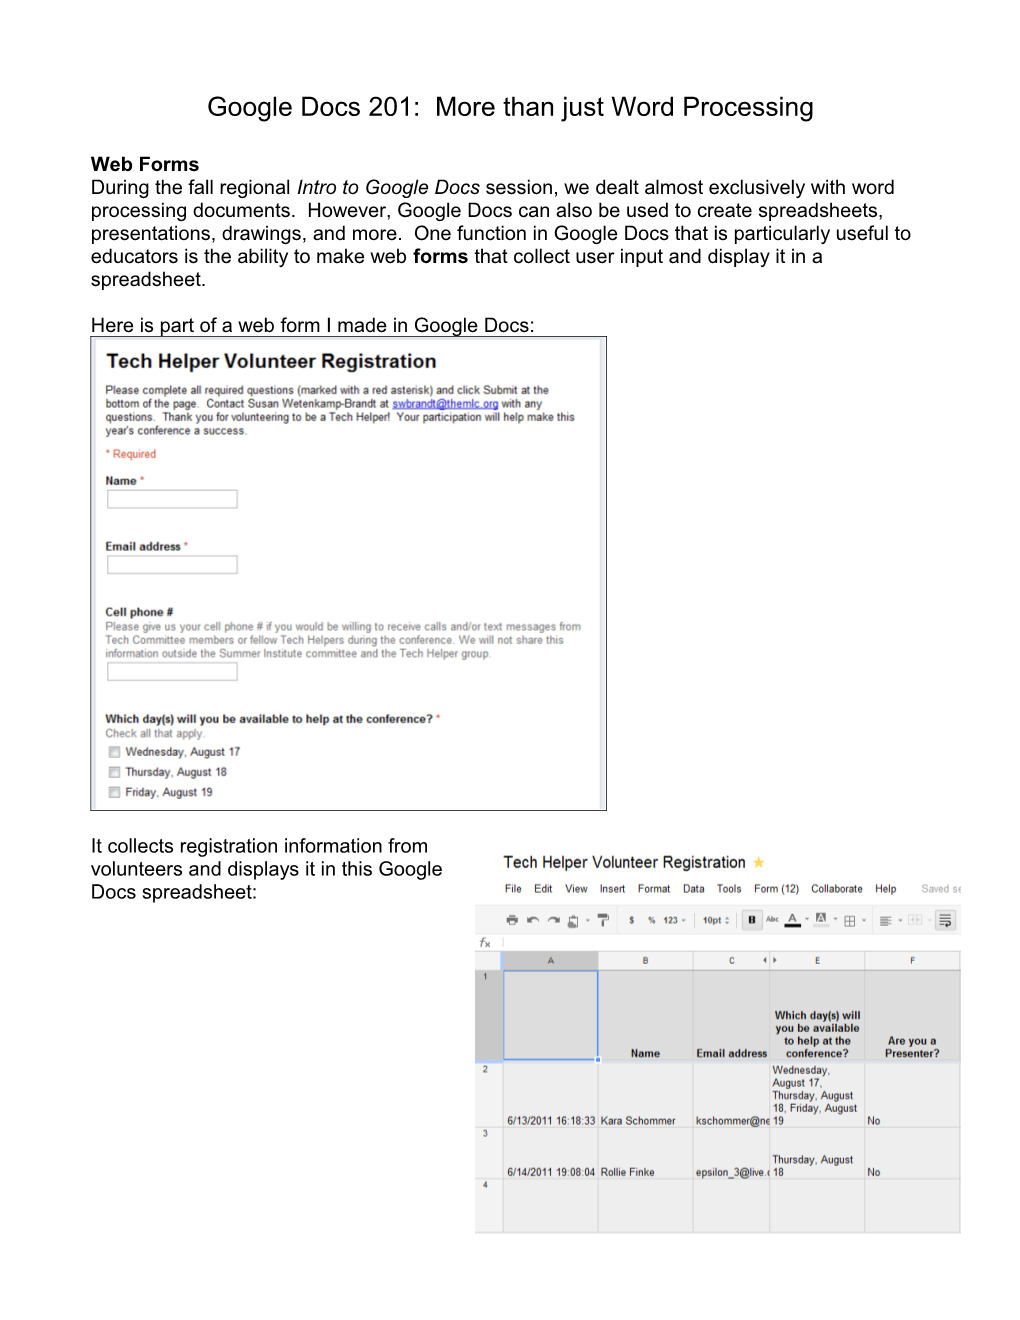 Google Docs 201: More Than Just Word Processing